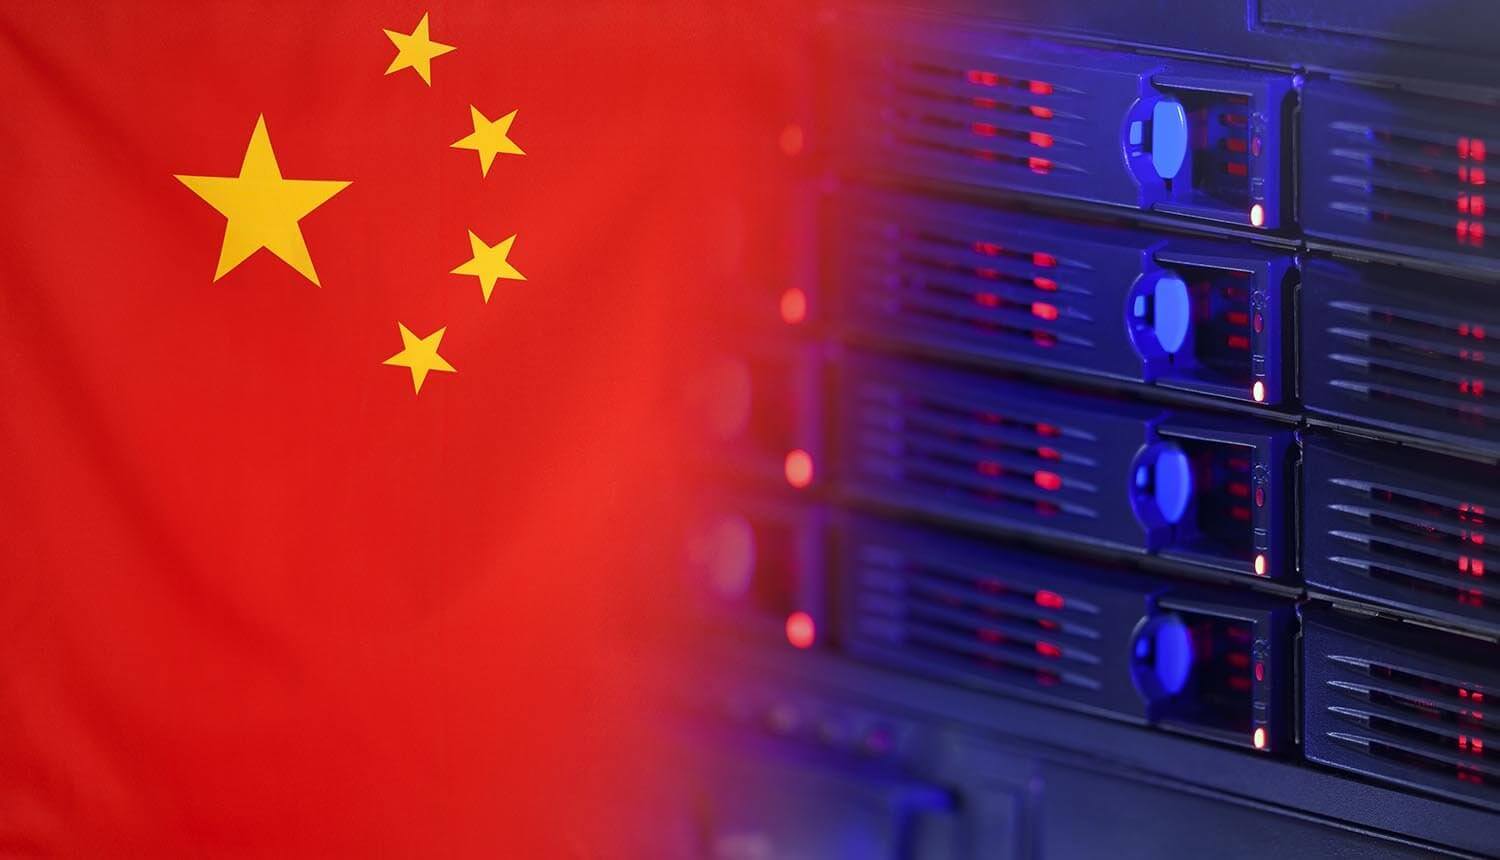 Data Leak Shows Chinese State-Linked Intelligence Firm Storing Data on Millions Worldwide